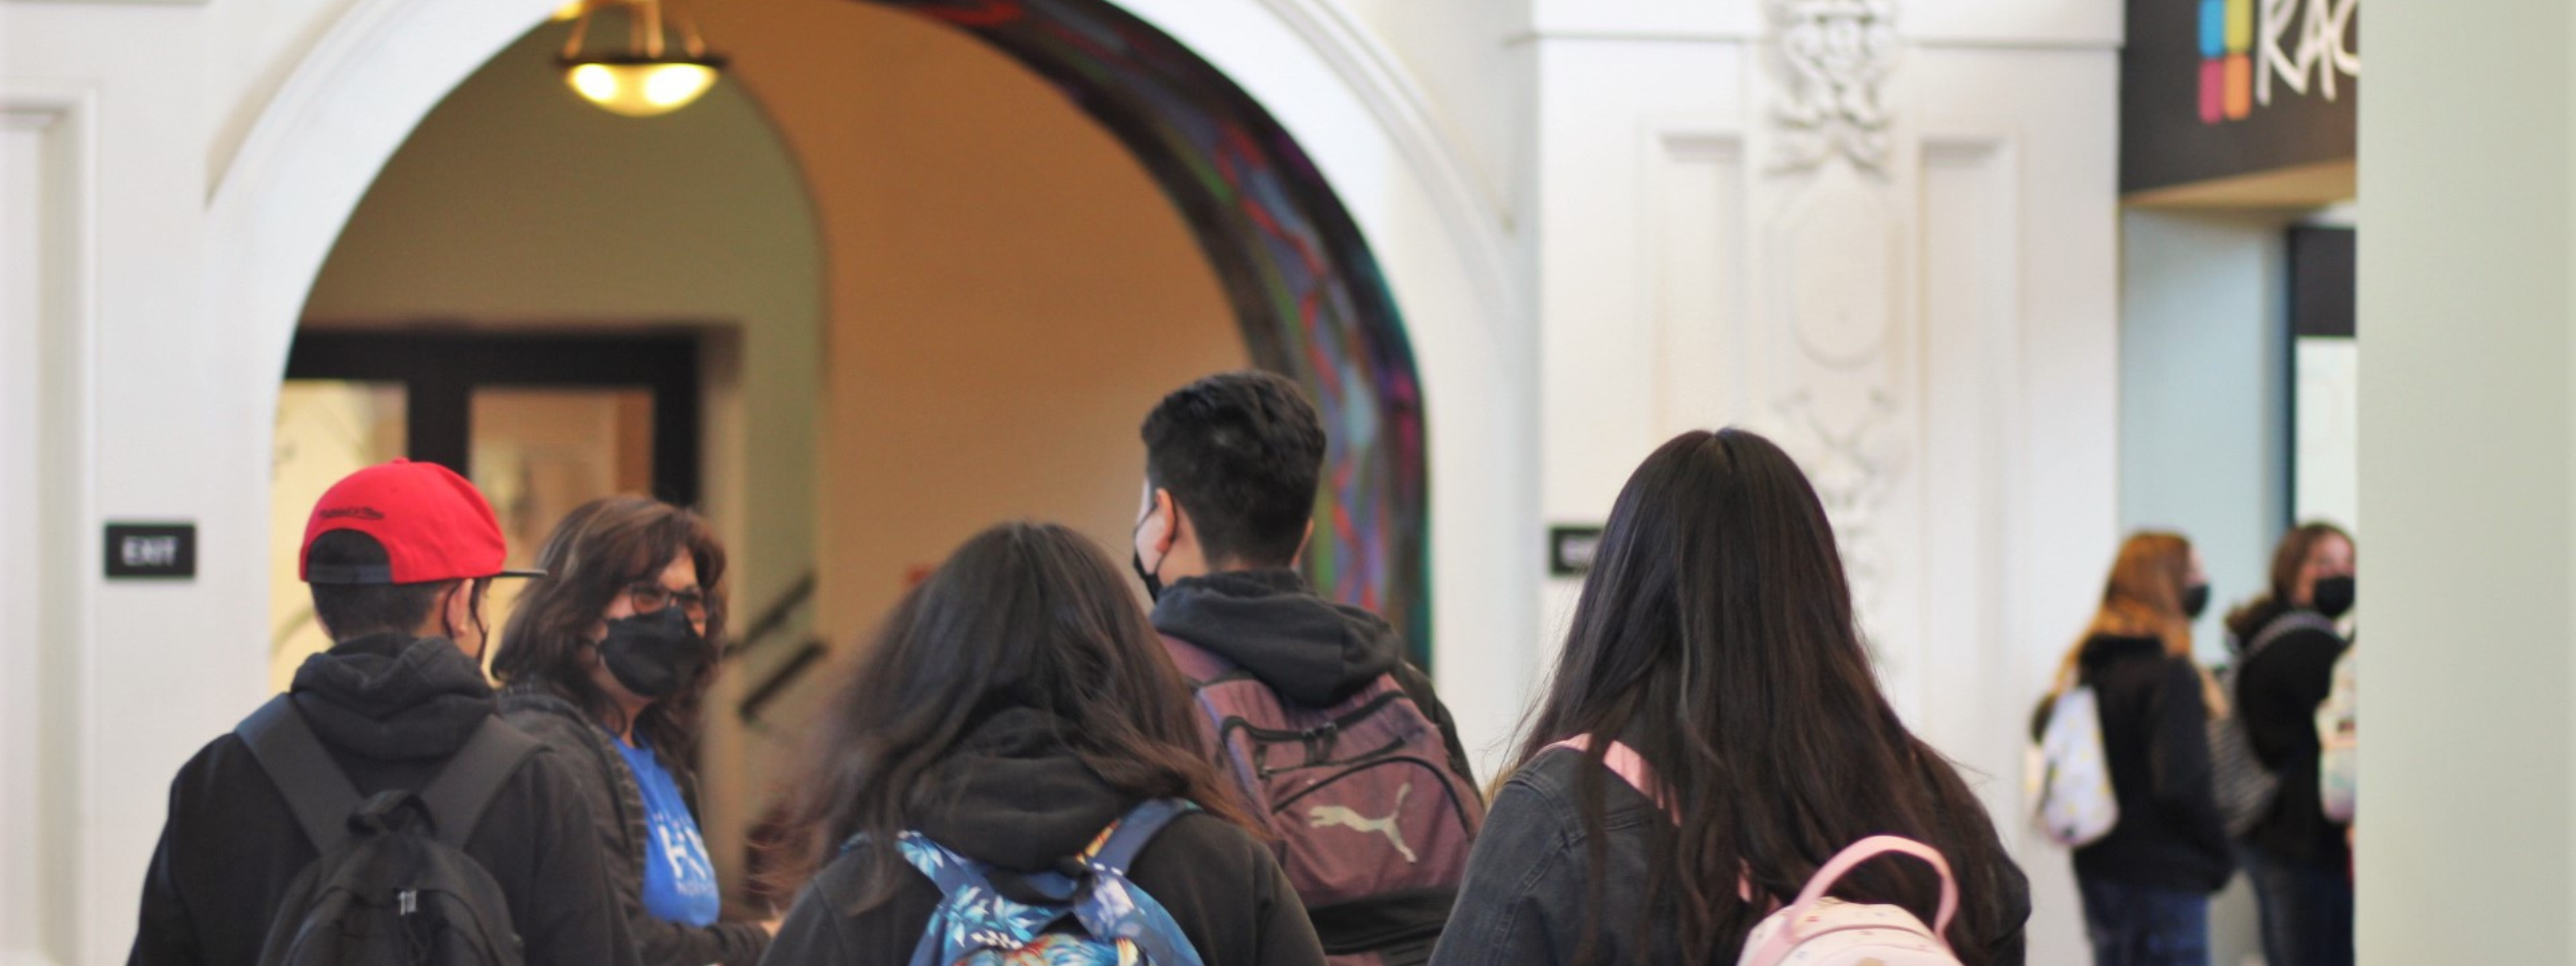 A group of students at the museum, shot from behind.